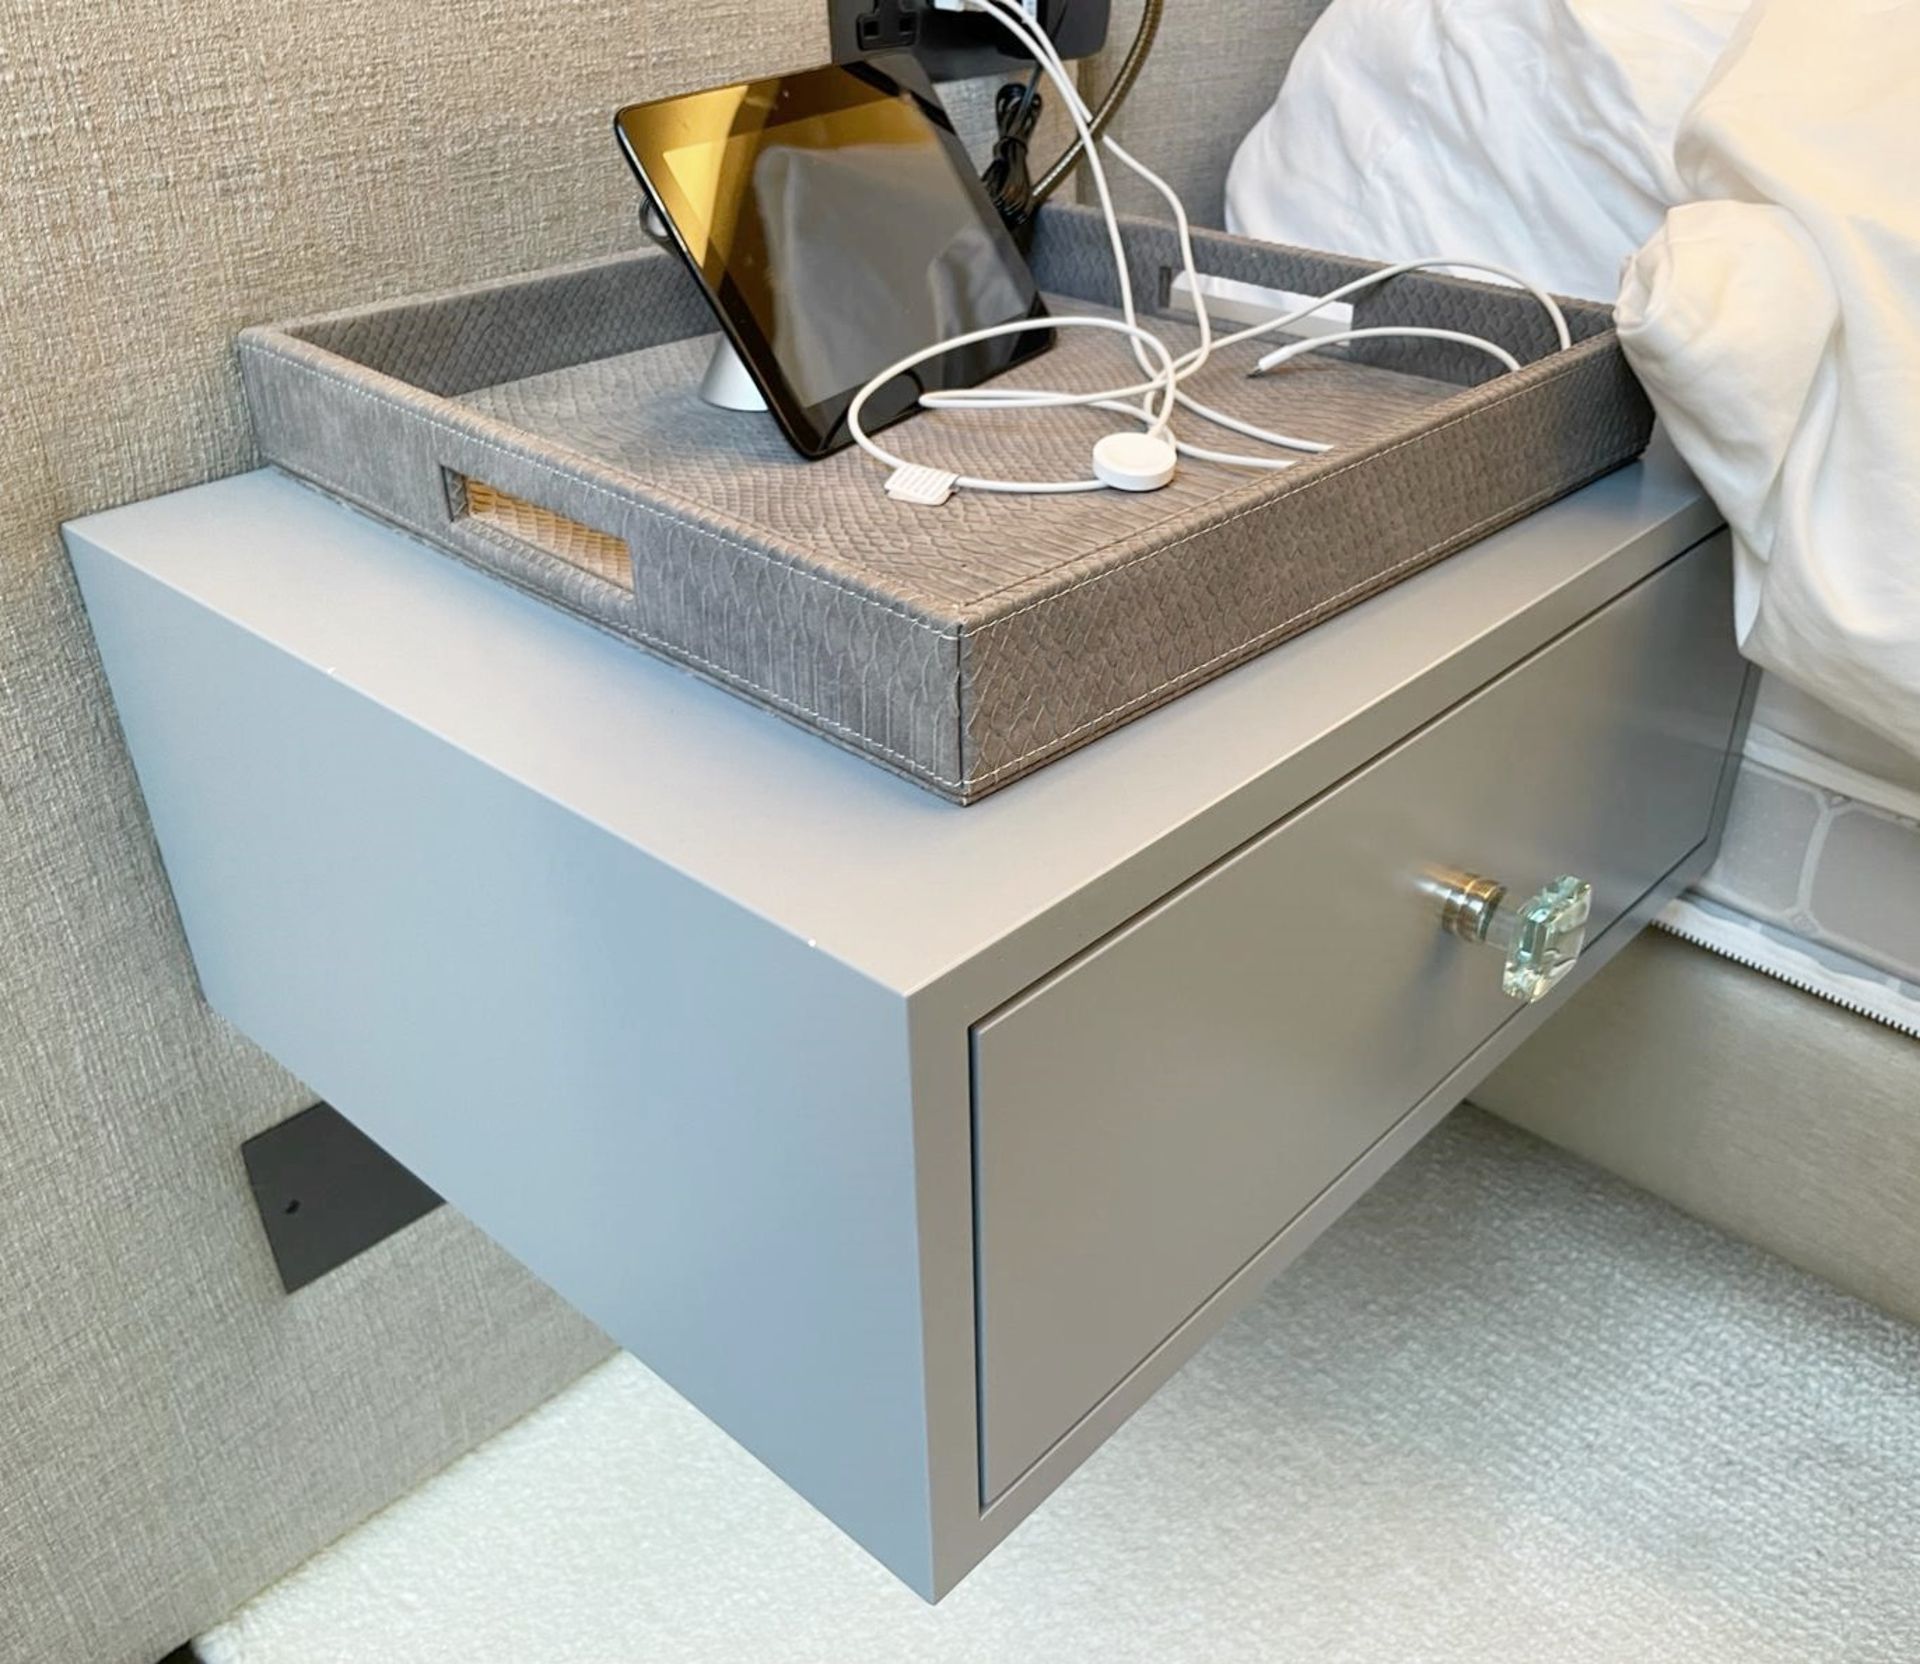 Pair of Stylish Wall Hung Bedside Drawers with a Grey Lacquer Finish and Glass Handles - Image 9 of 14